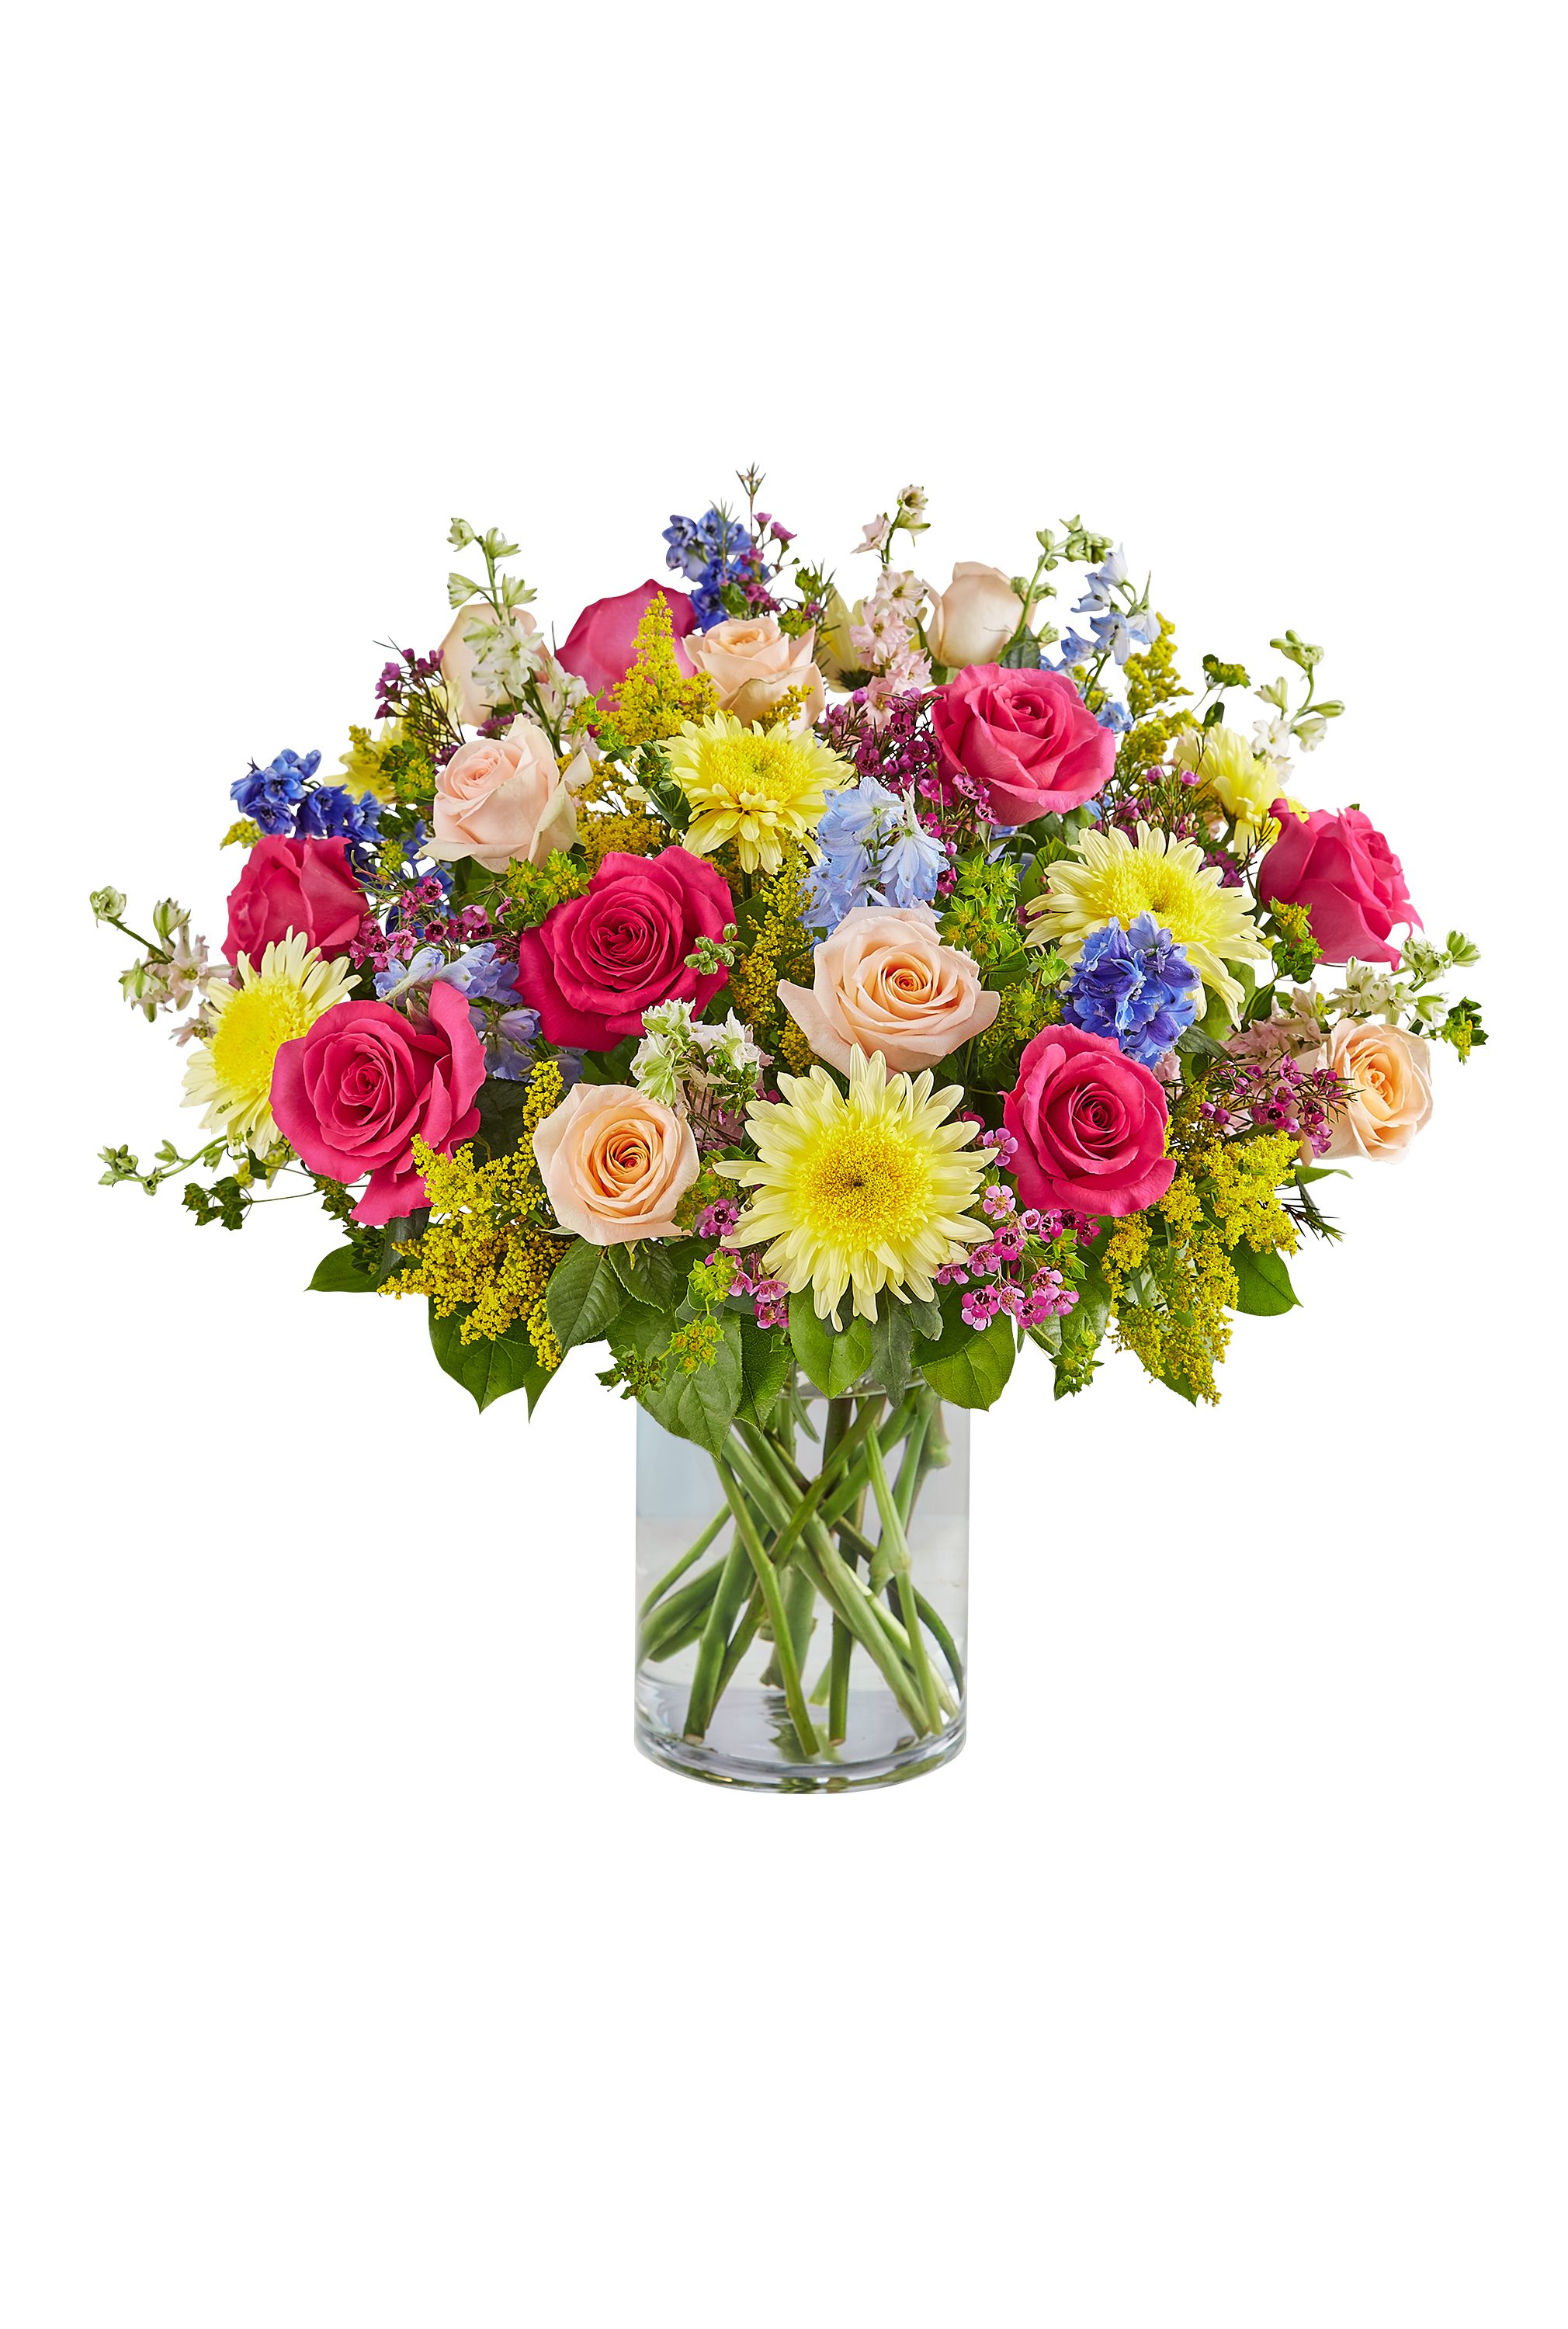 20 Mother's Day Flower Ideas - Mother's Day Bouquets